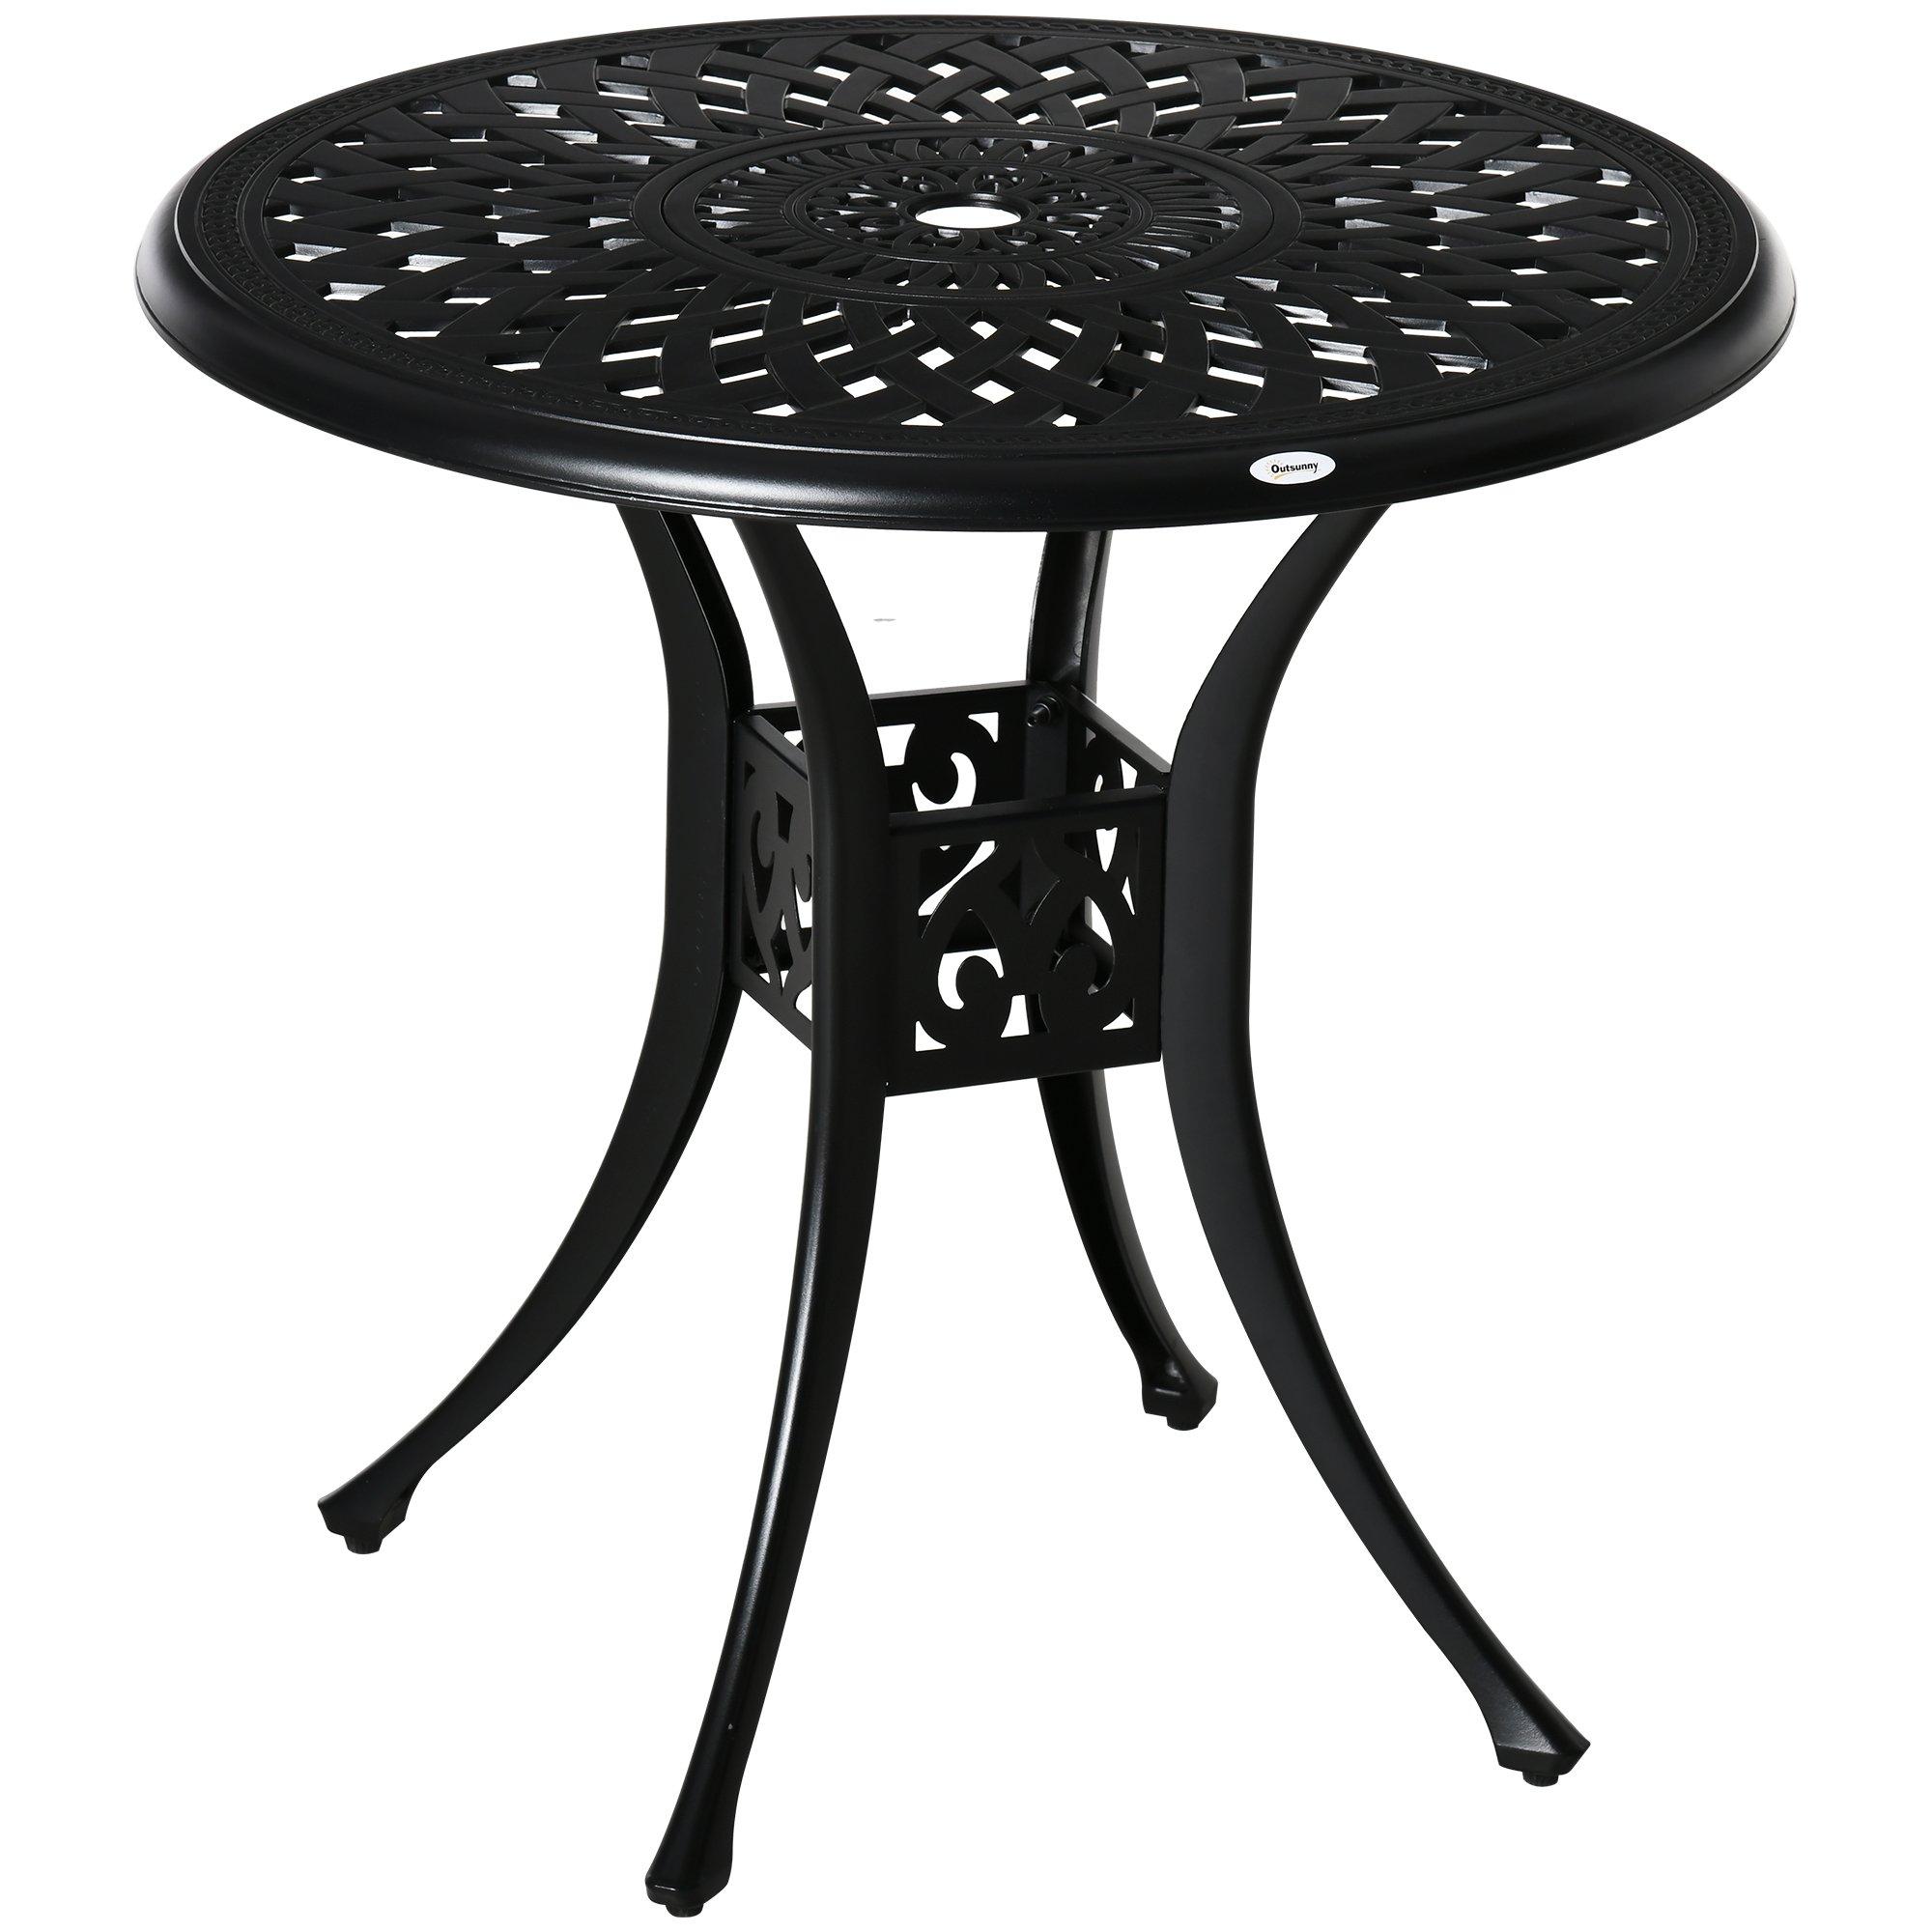 78cm Round Garden Dining Table Only with Parasol Hole Cast Aluminium